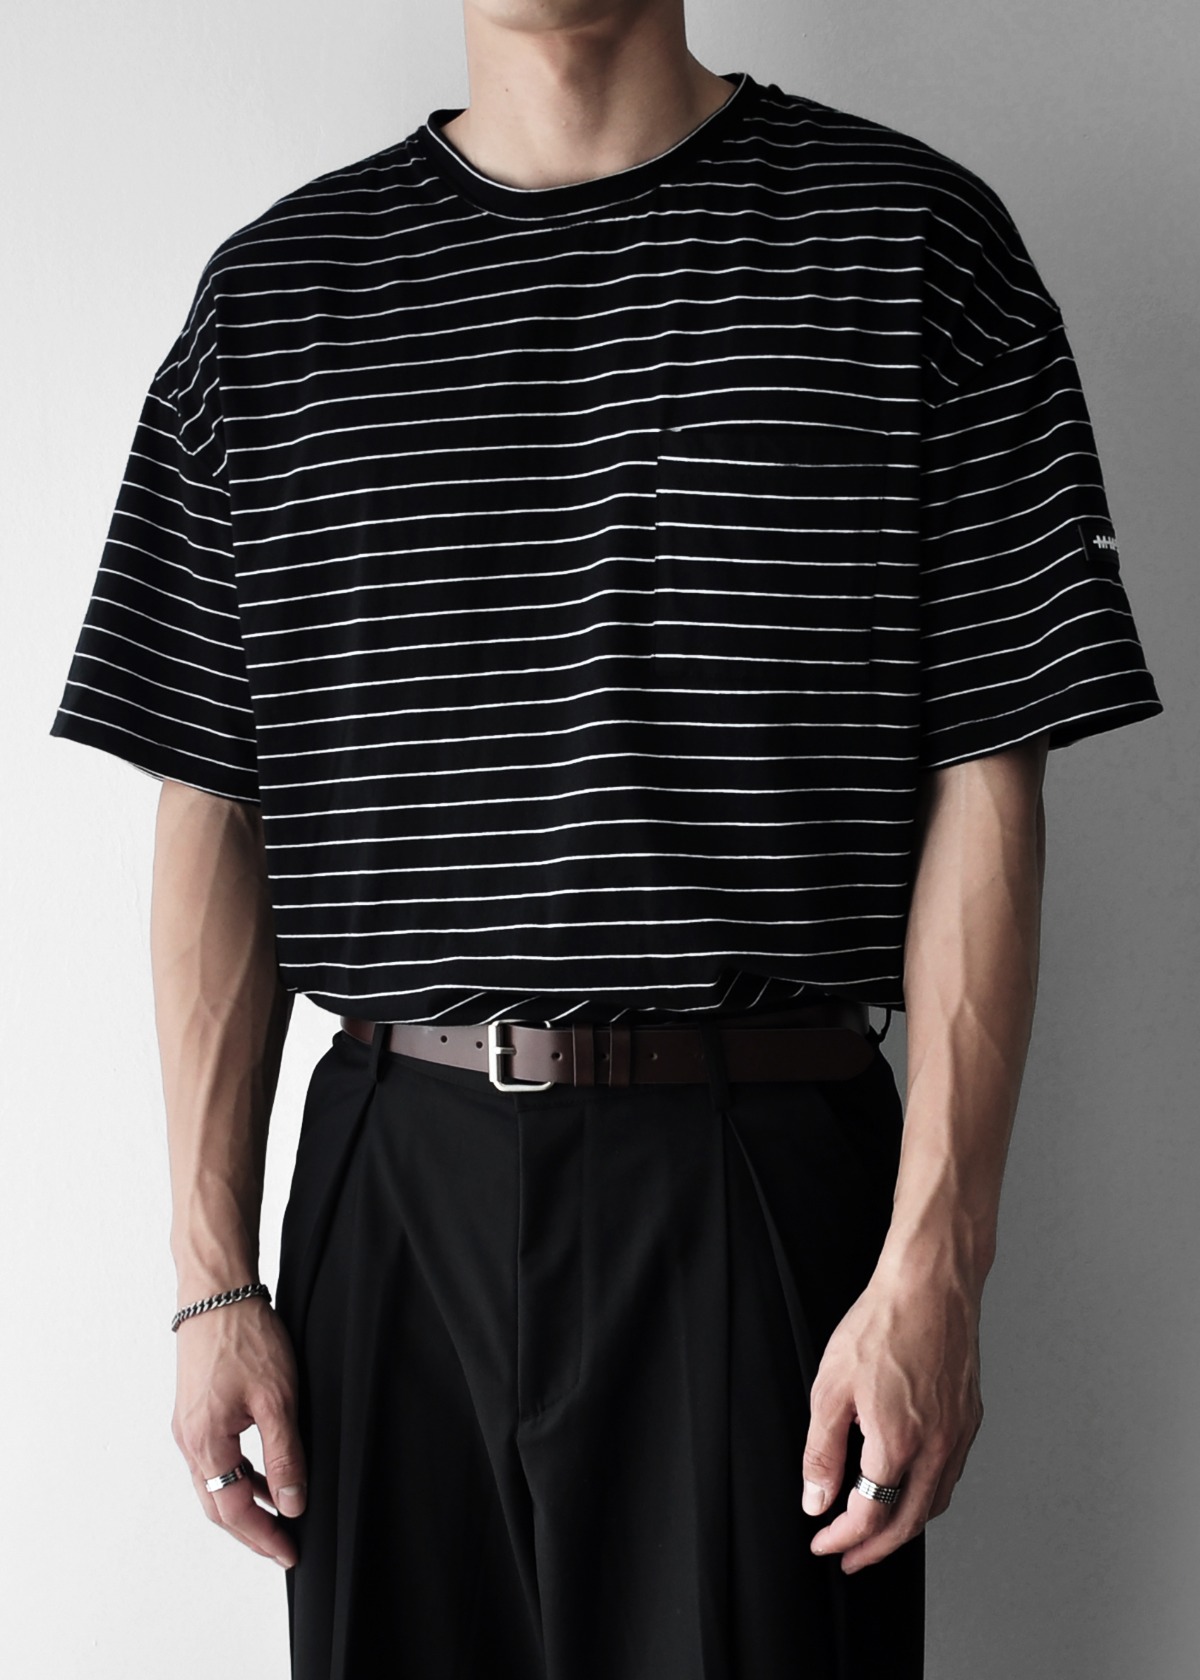 SDDL SIGNATURE PATCH DT STRIPE HALF SLEEVE T #2(2차 재입고)